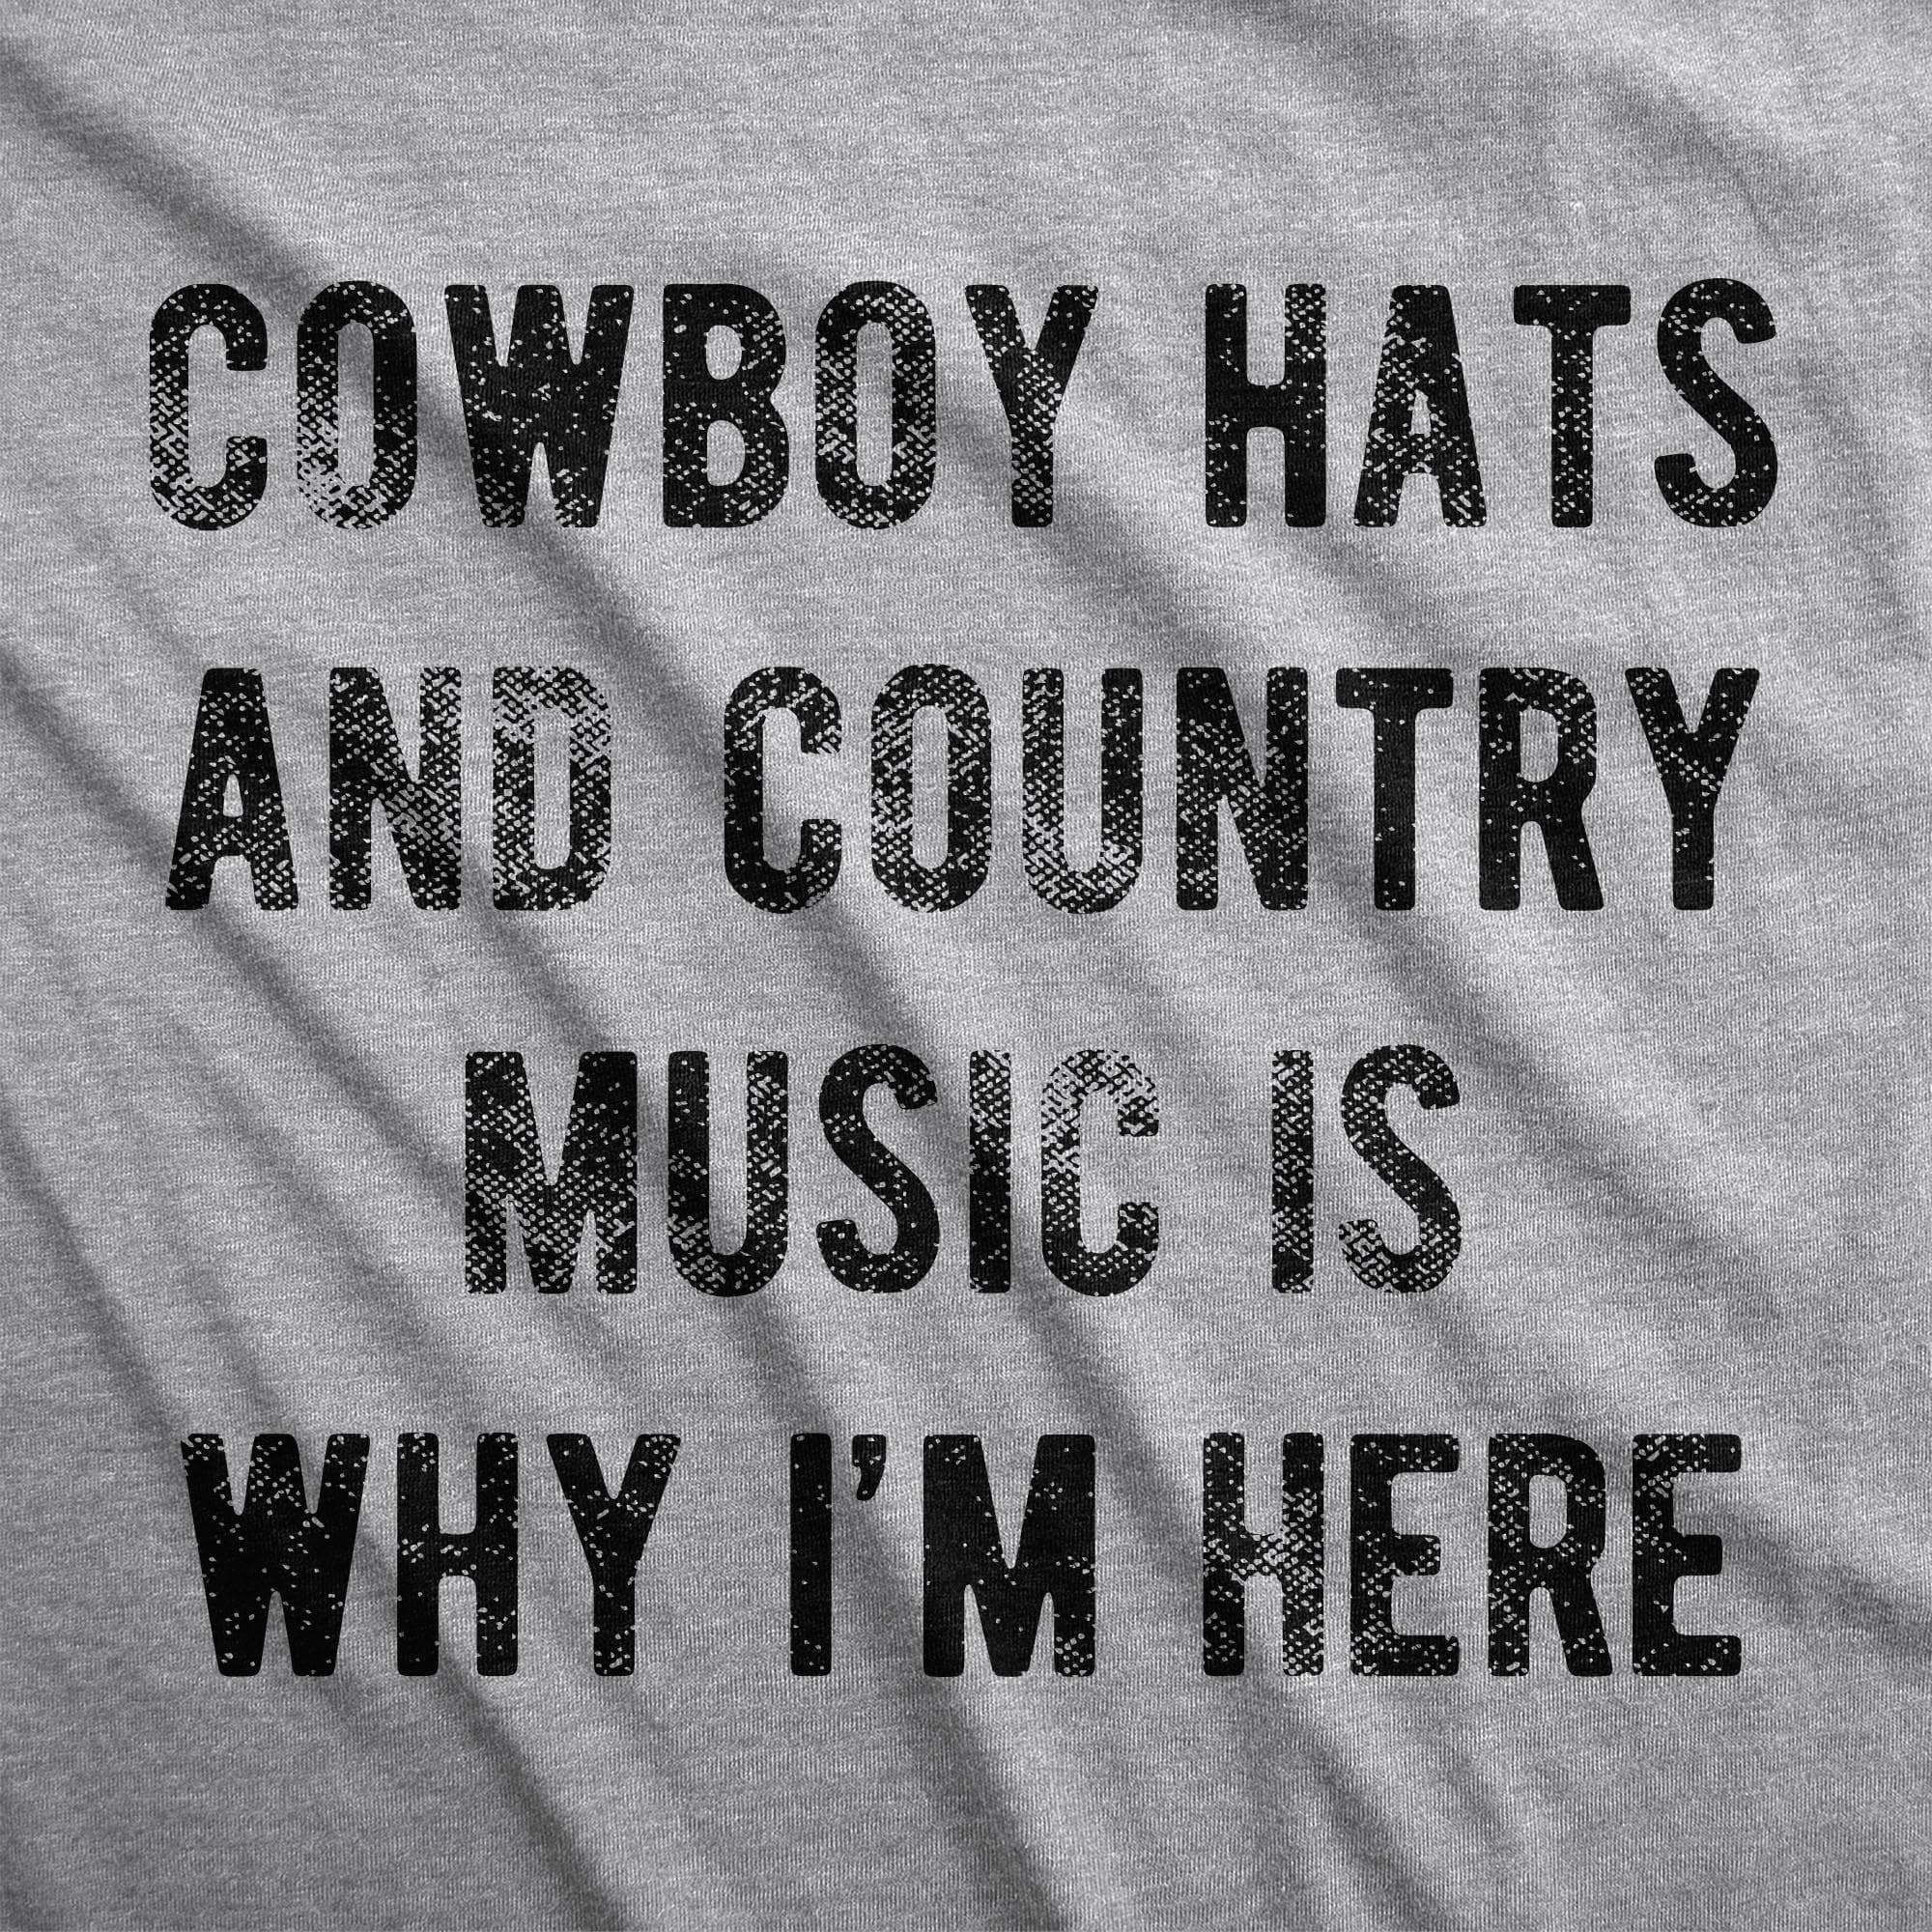 Cowboy Hats And Country Music Women's Tshirt - Crazy Dog T-Shirts